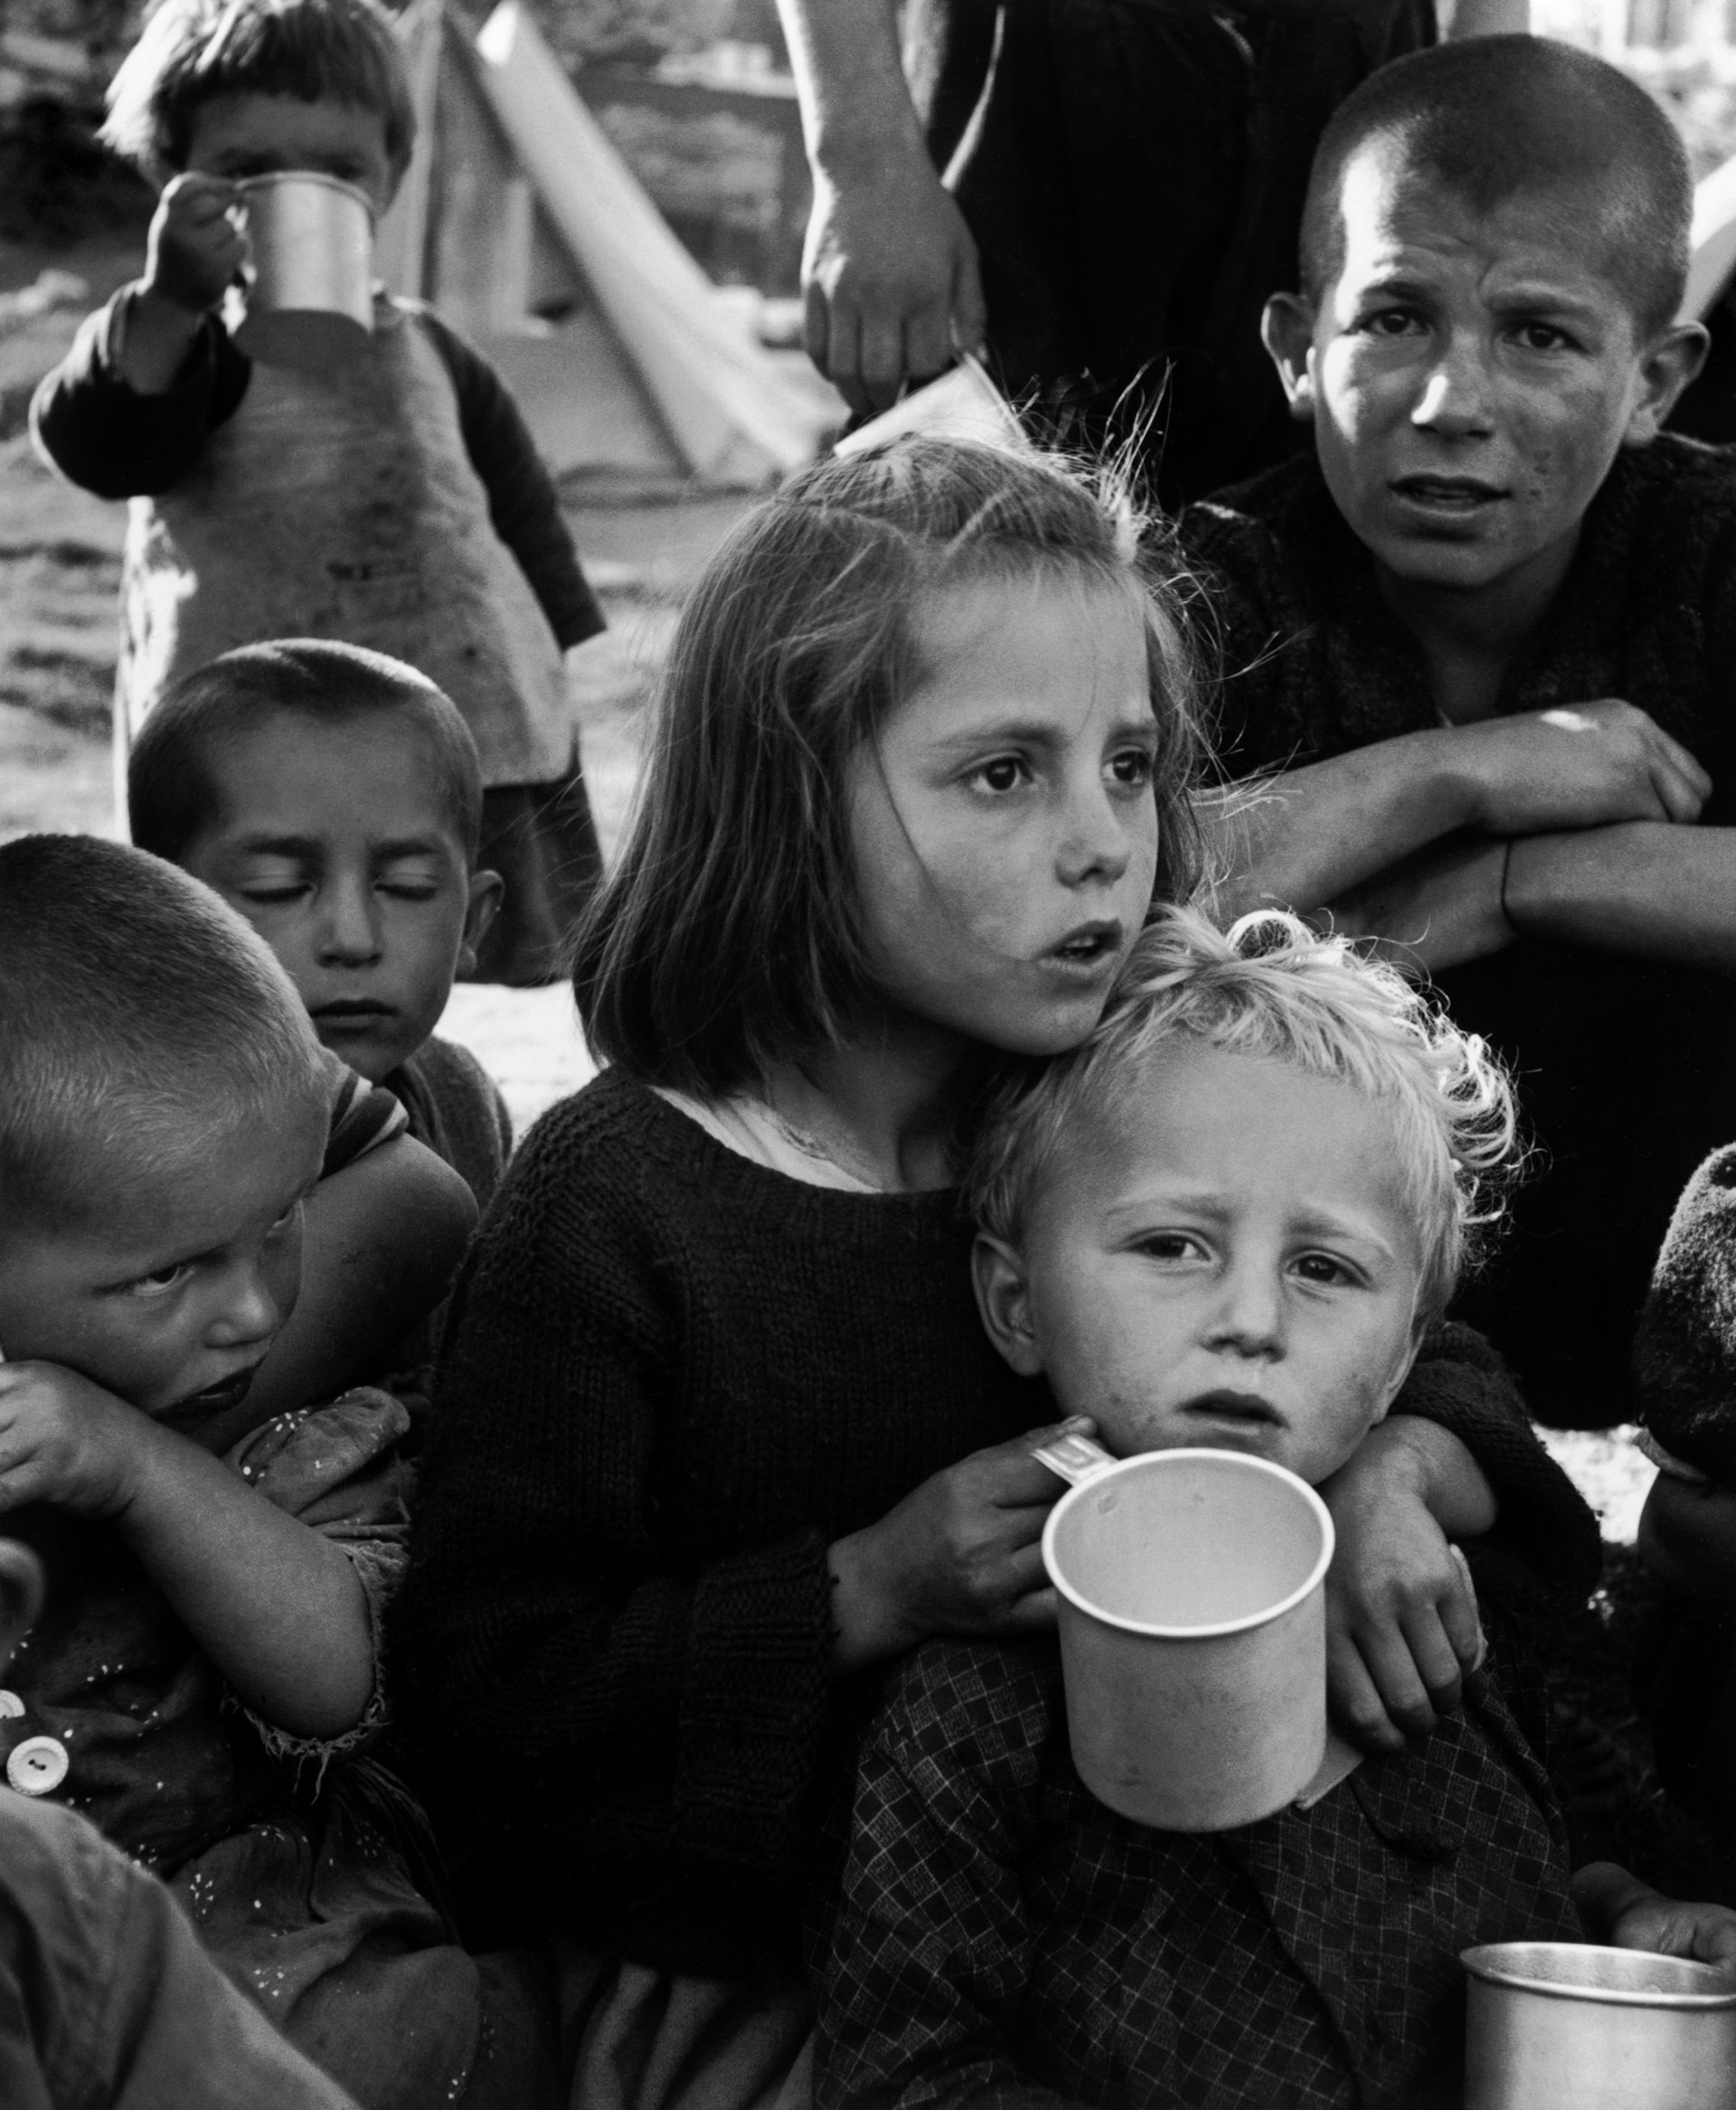 Refugees from the civil war areas. Waiting for this unfamiliar stuff, UNICEF milk (reconstituted from powdered milk) distributed for the first time at the refugee camp. Ioannina, Greece 1948 © David Seymour (Chim)